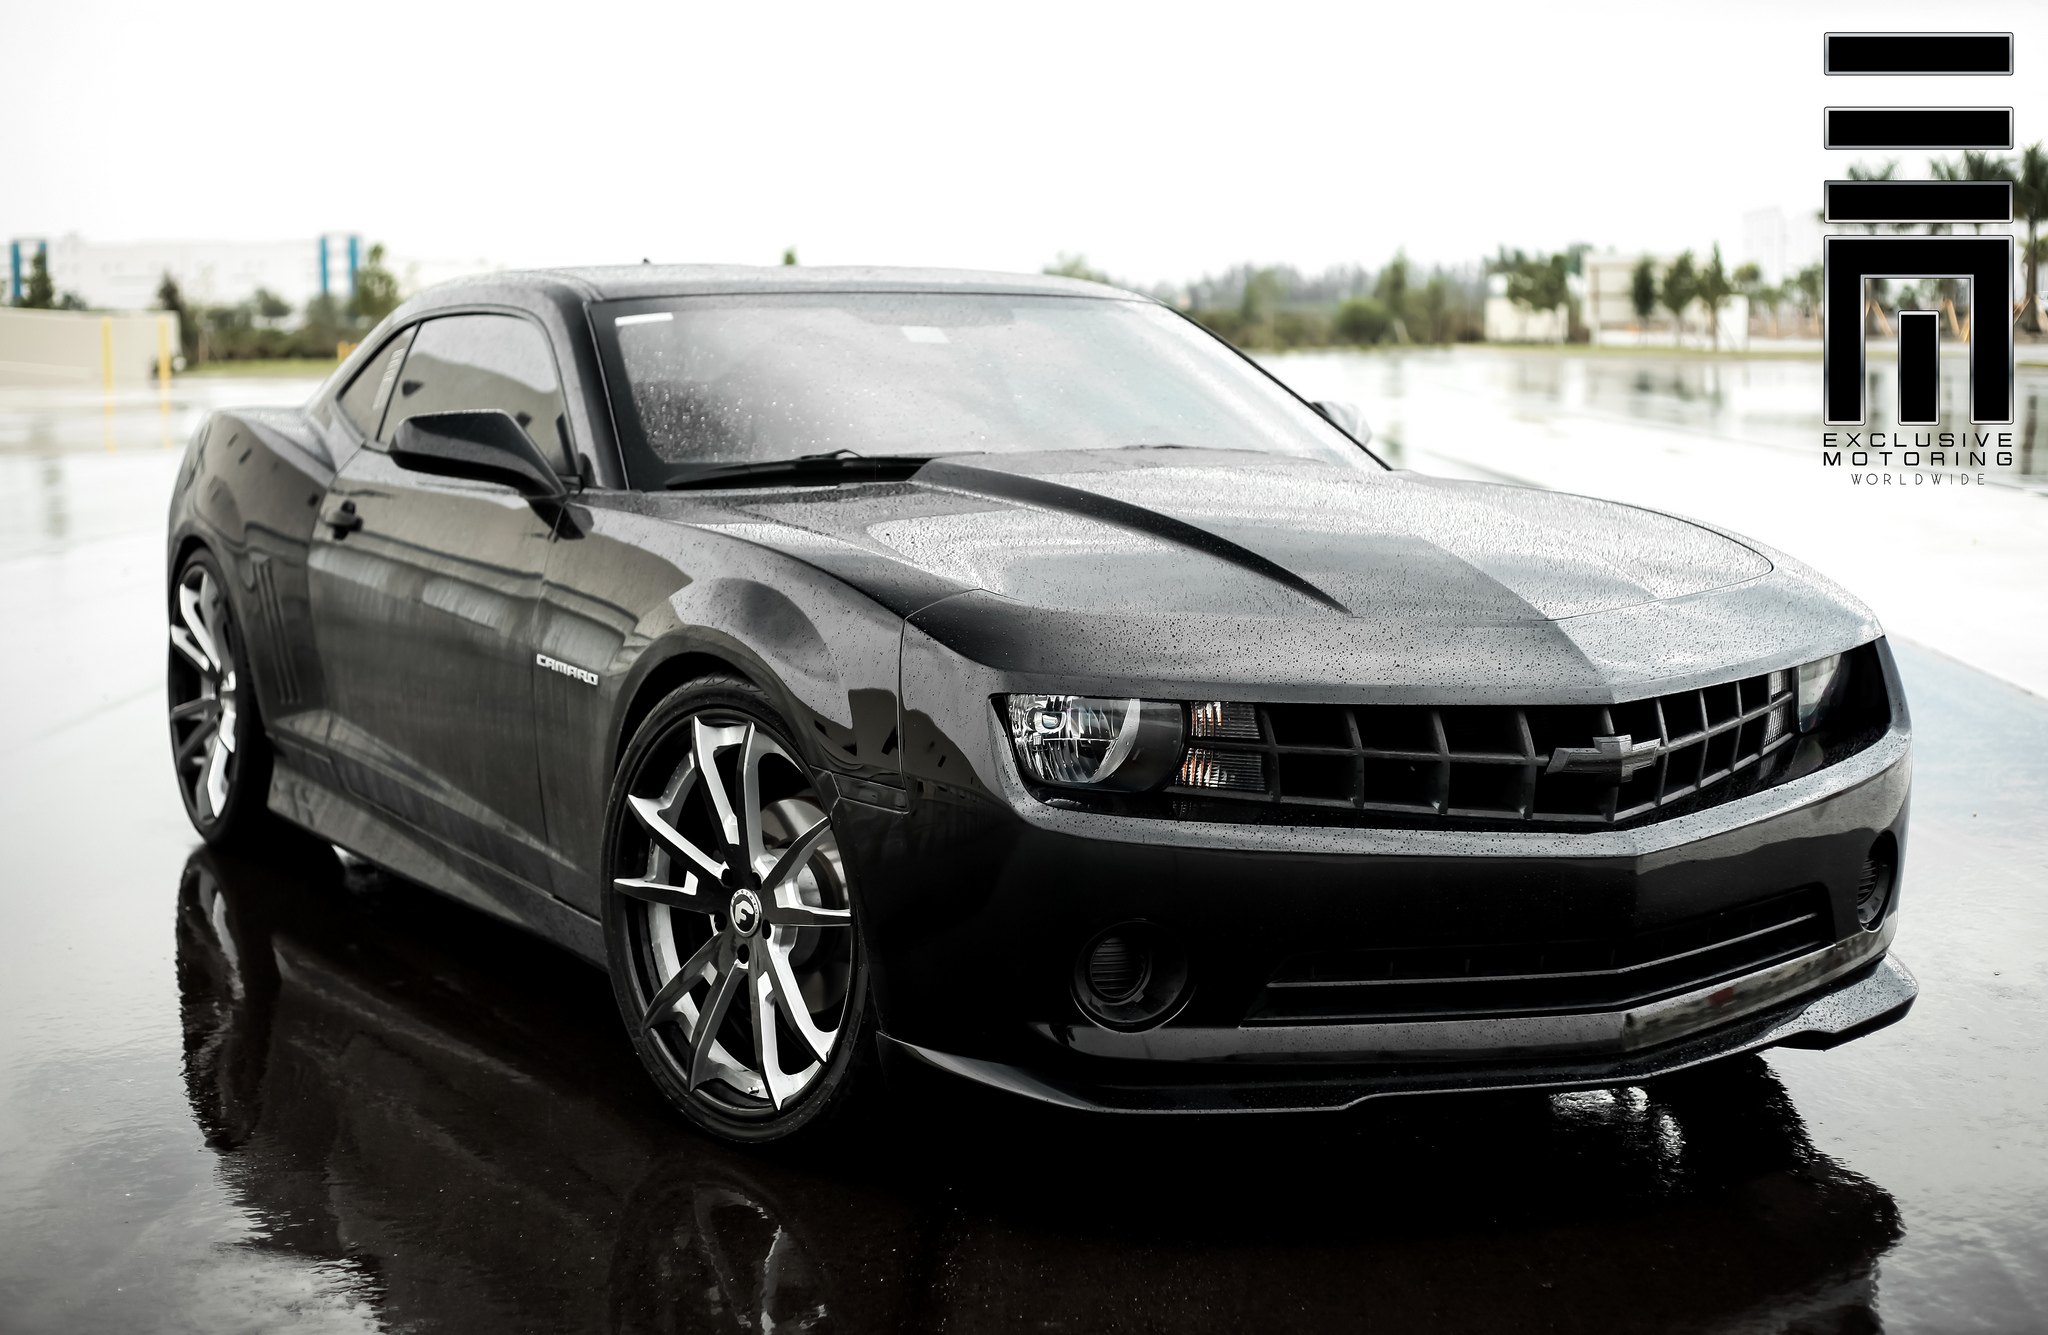 Camaro SS With Ground Effects on Forgiato Custom Wheels - Photo by Exclusive Motoring